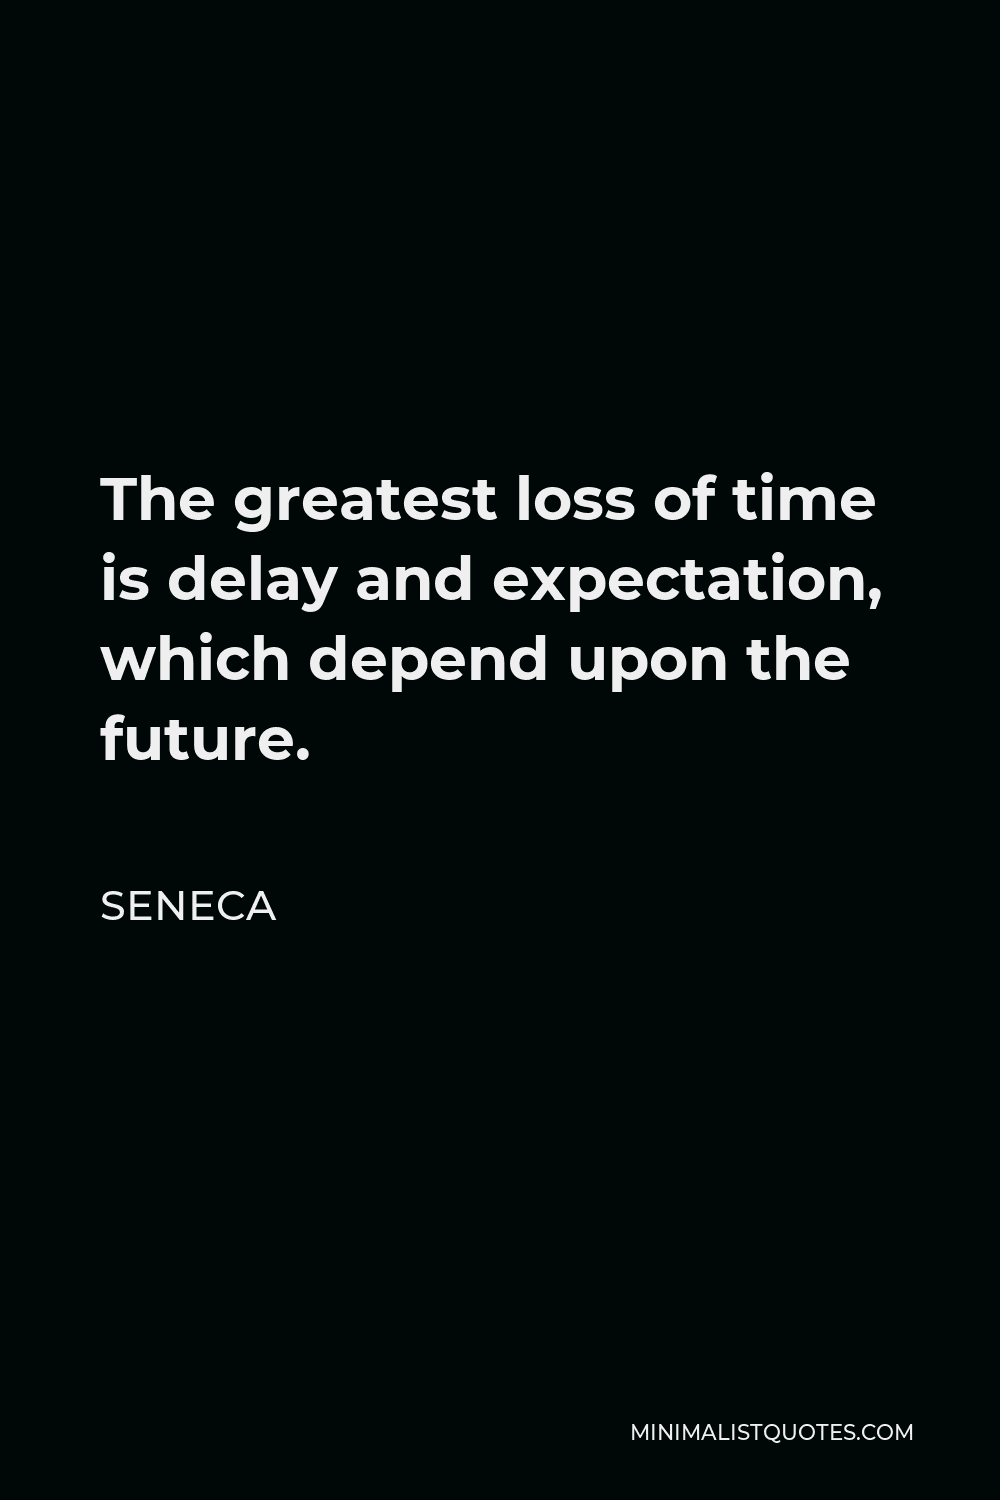 Seneca Quote - The greatest loss of time is delay and expectation, which depend upon the future.